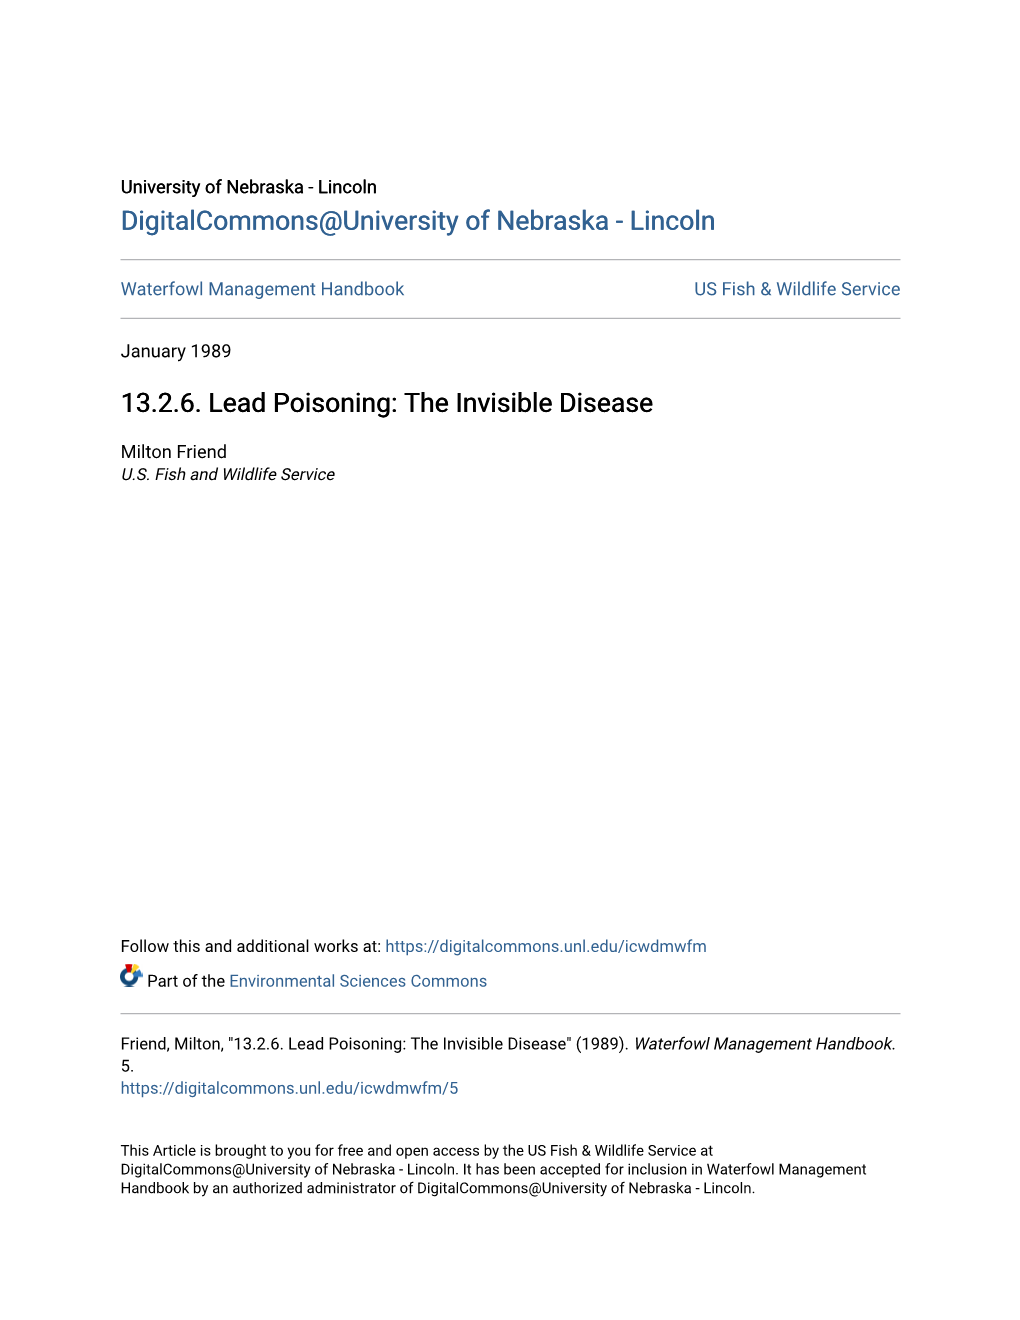 13.2.6. Lead Poisoning: the Invisible Disease